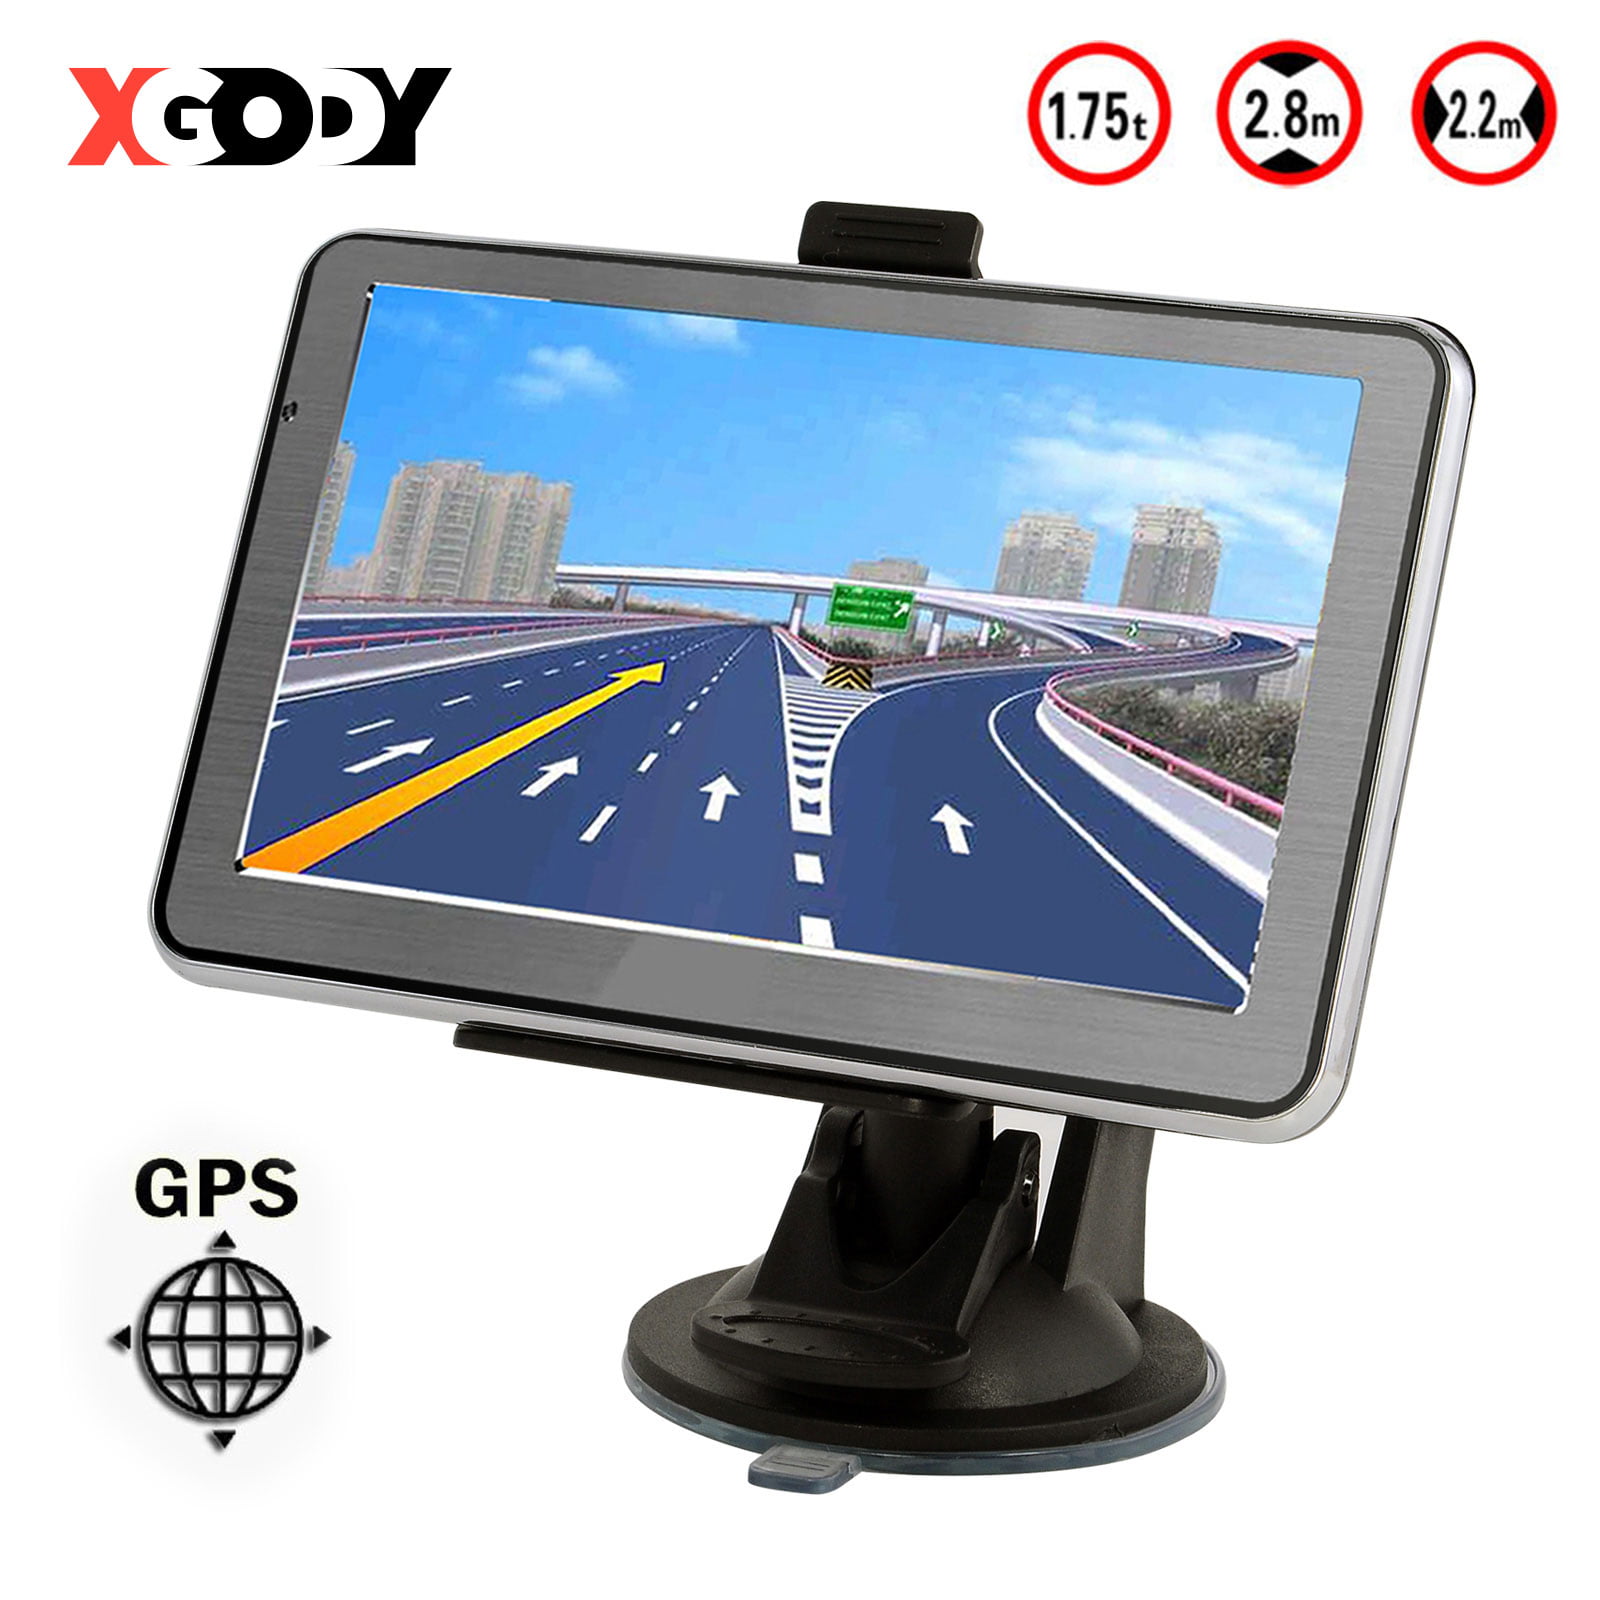 Driving Alert Xgody GPS Navigation for Car Truck 9 Inch HD Touch Screen 8GB Bluetooth Voice Broadcast Function Vehicle GPS Satellite Navigator System with Free Lifetime Maps 